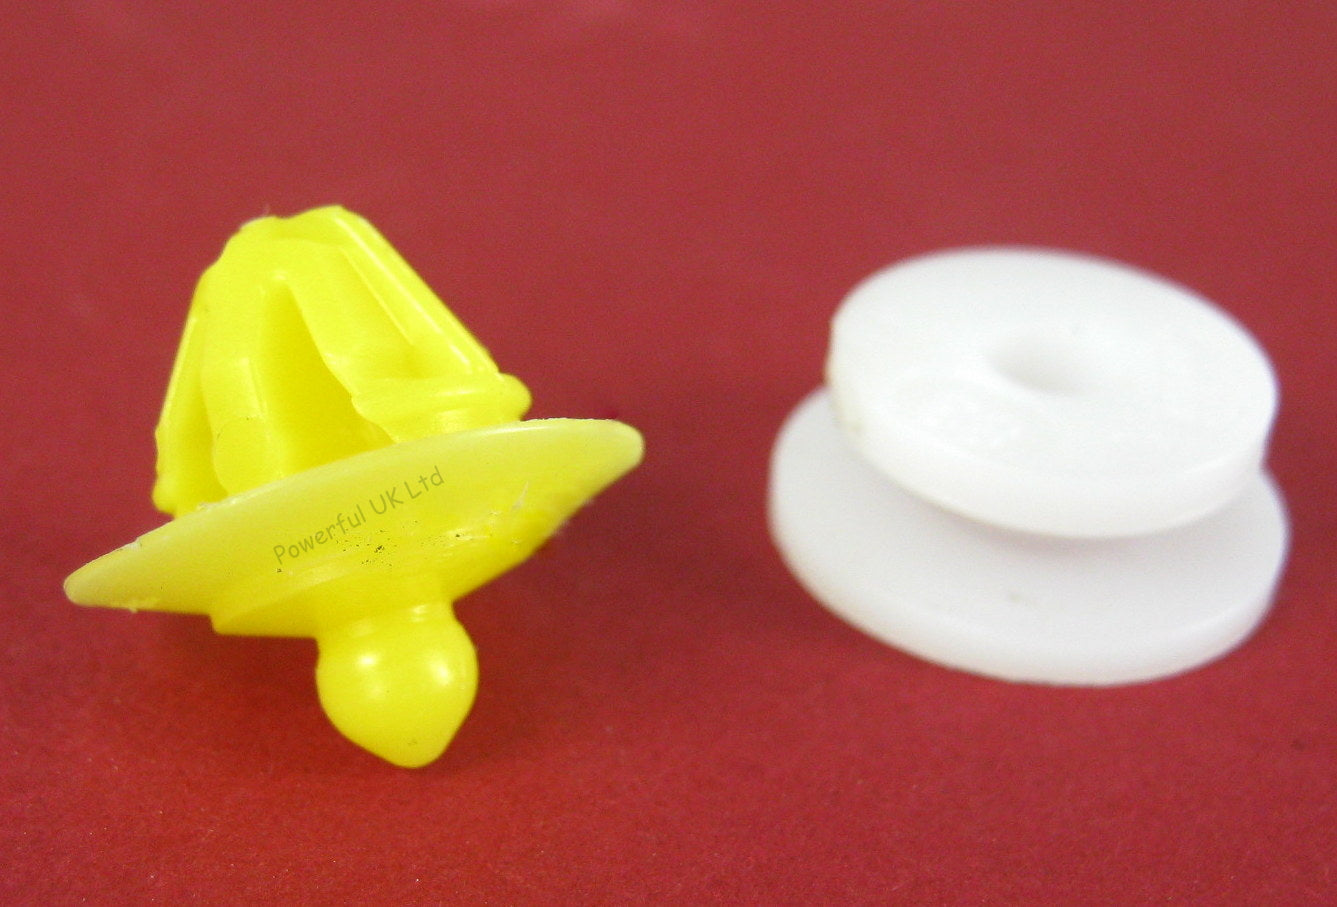 Yellow & White plastic wheel arch door moulding clips for Land Rover Freelander 2 - 10 pack